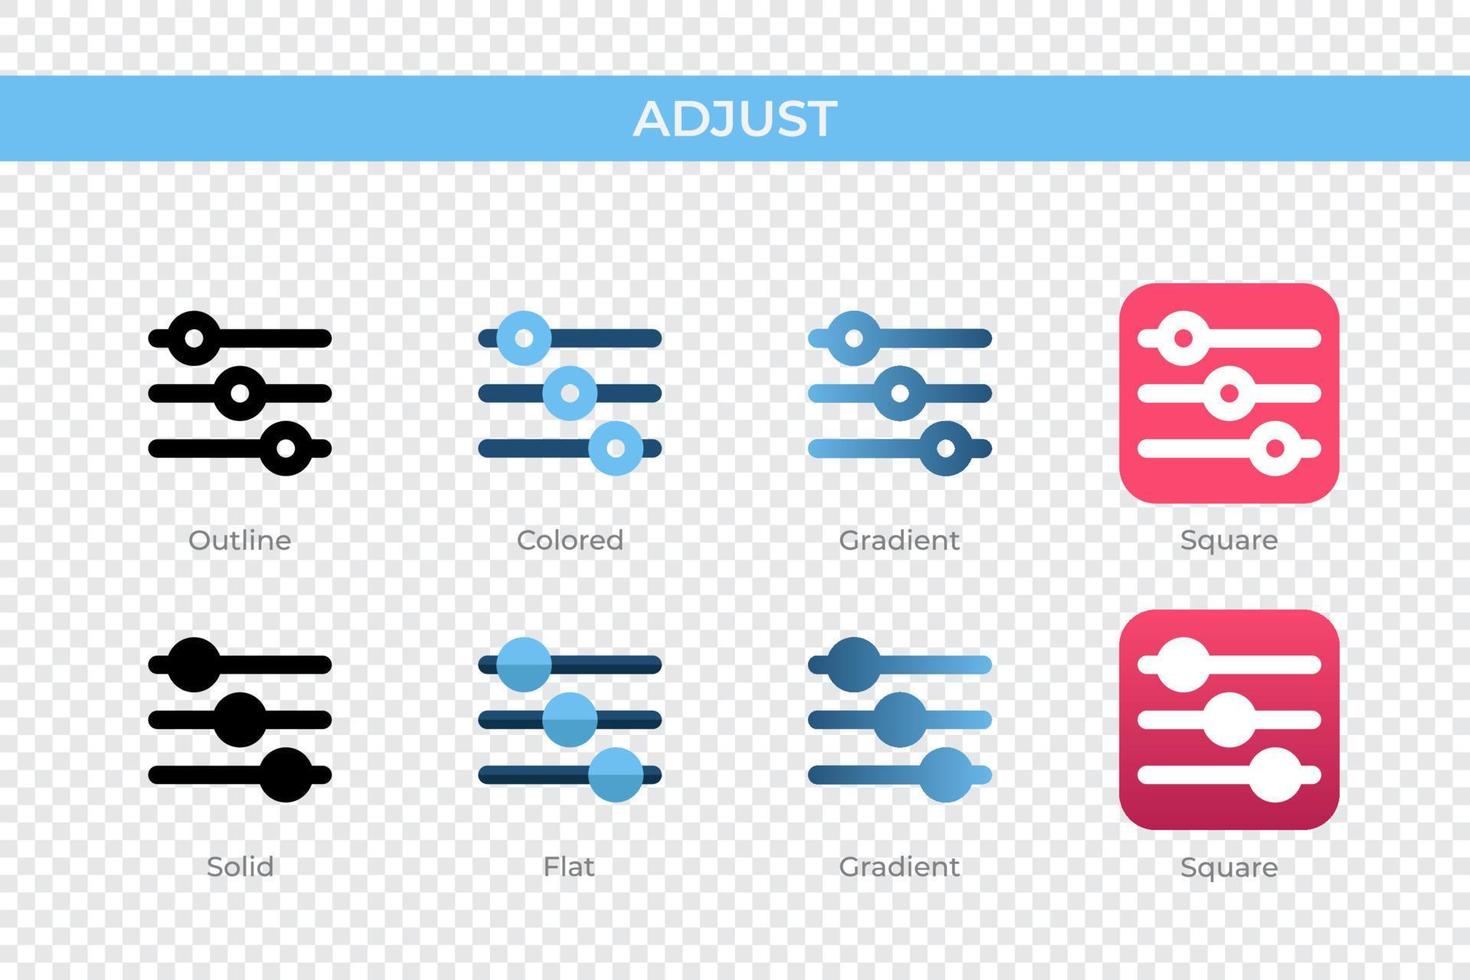 adjust icon in different style. adjust vector icons designed in outline, solid, colored, gradient, and flat style. Symbol, logo illustration. Vector illustration